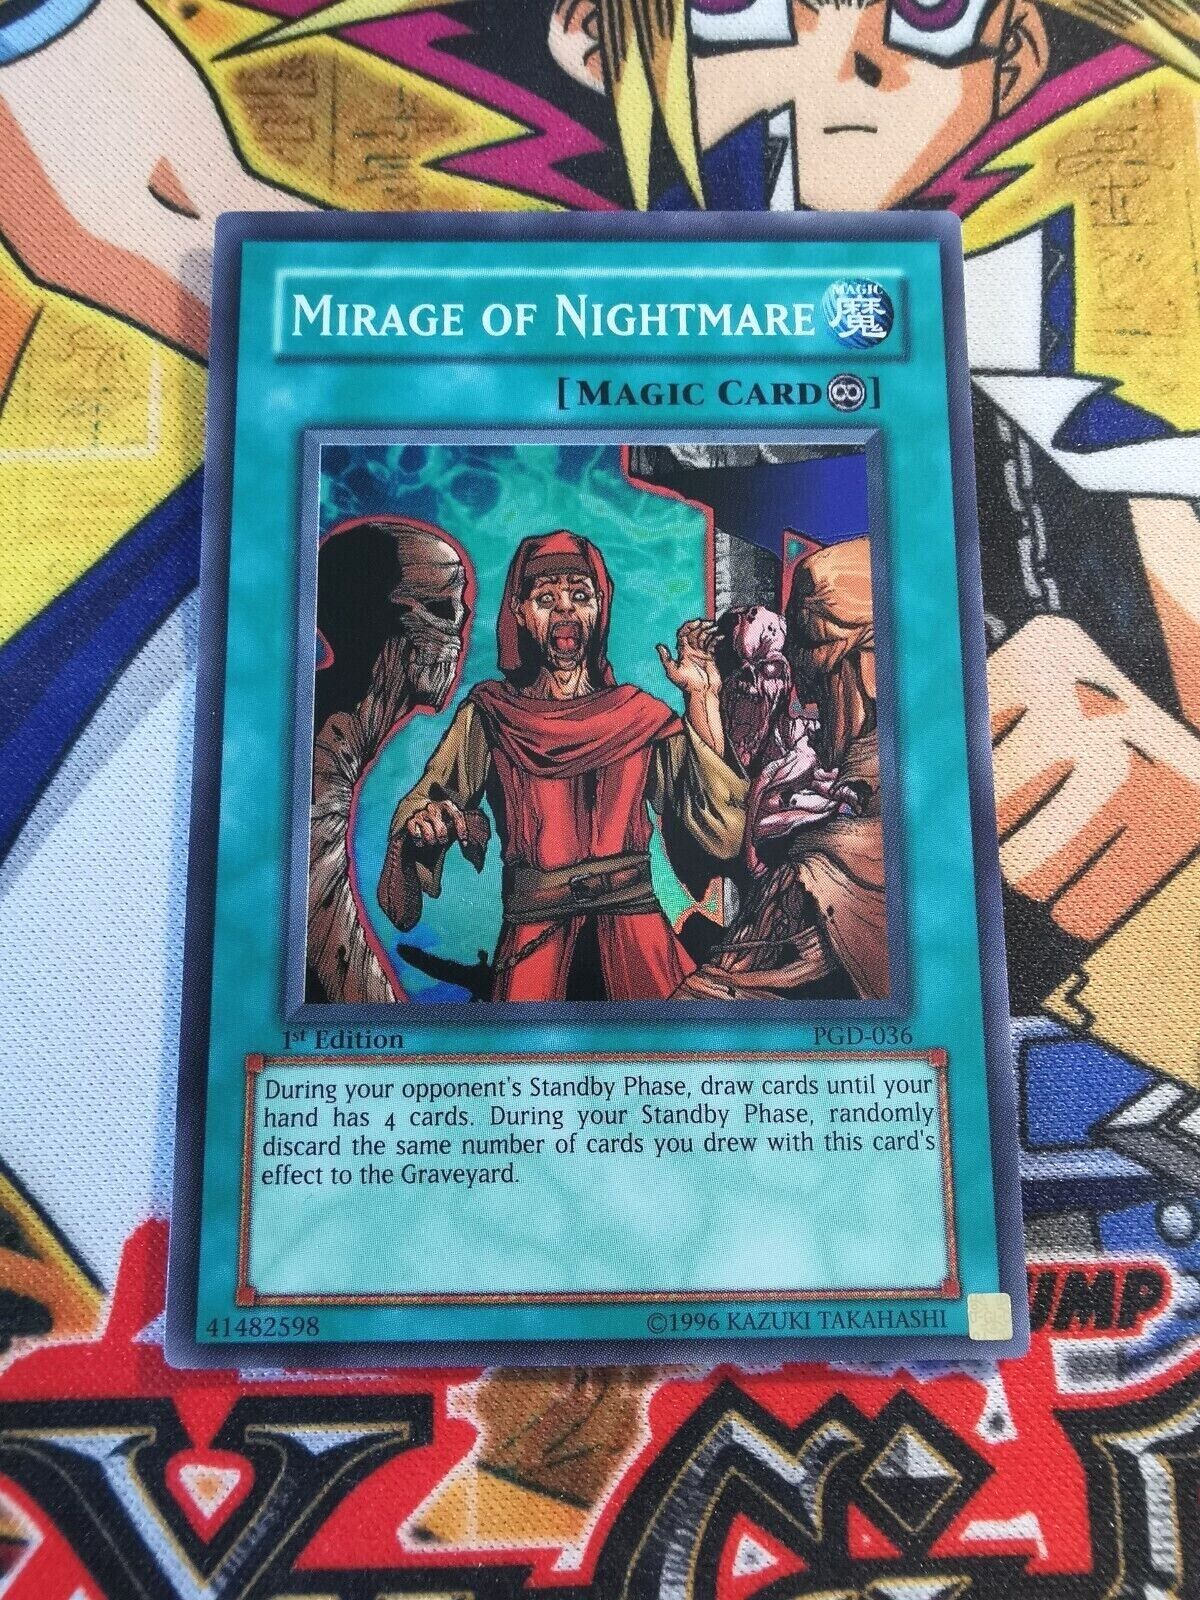 Mirage of Nightmare pgd-036 1st Edition (MINT/NM+) Super Rare Yu-Gi-Oh